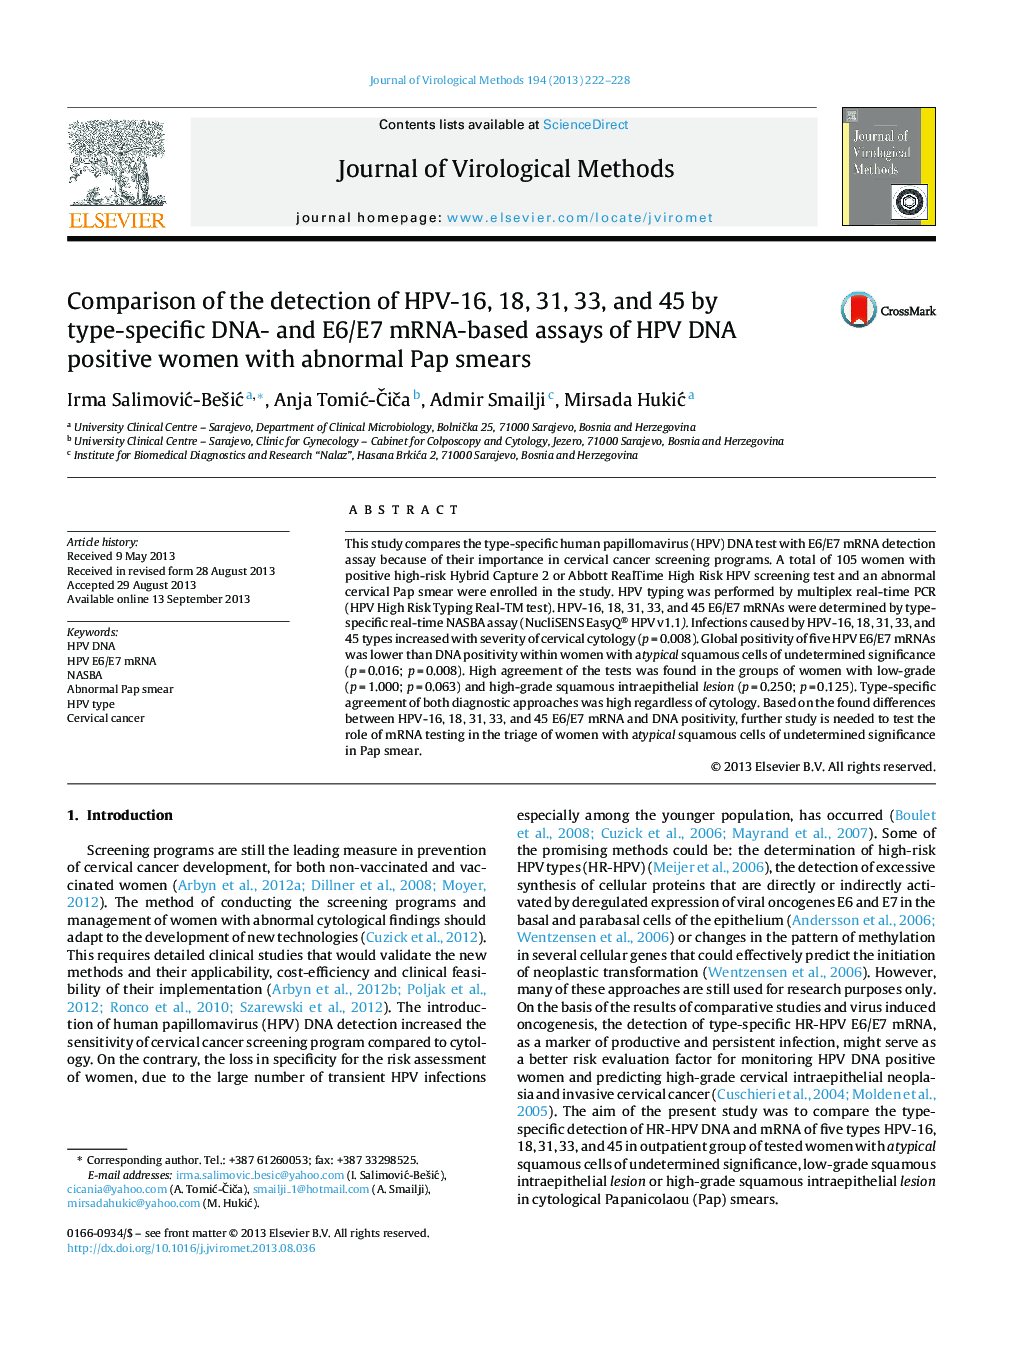 Comparison of the detection of HPV-16, 18, 31, 33, and 45 by type-specific DNA- and E6/E7 mRNA-based assays of HPV DNA positive women with abnormal Pap smears